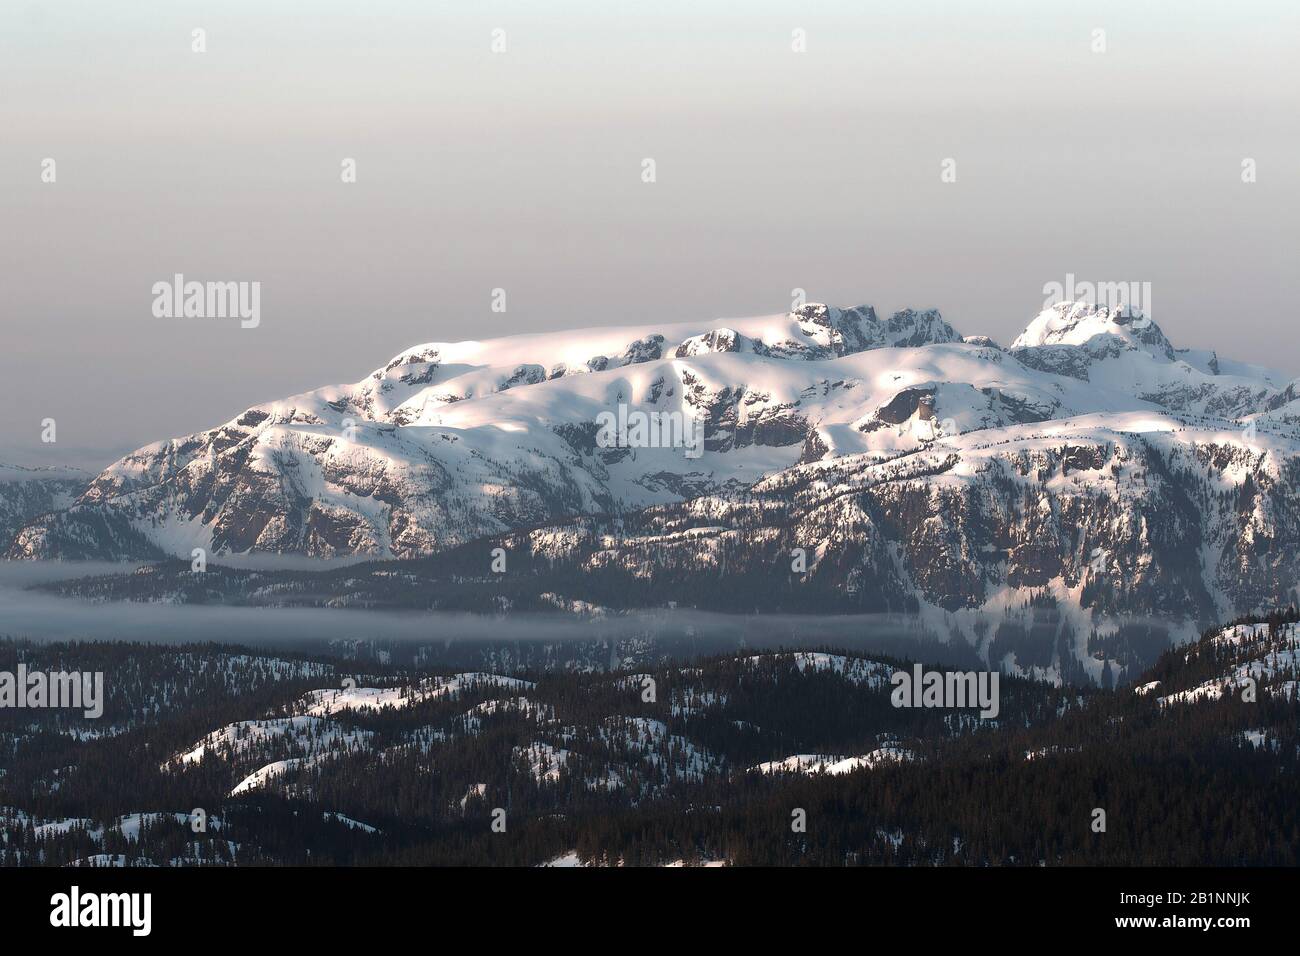 Beautiful Comox Glacier on Vancouver Island as seen from Mount Washington at sunrise. It lies within Strathcona Provincial Park in British Columbia. Stock Photo